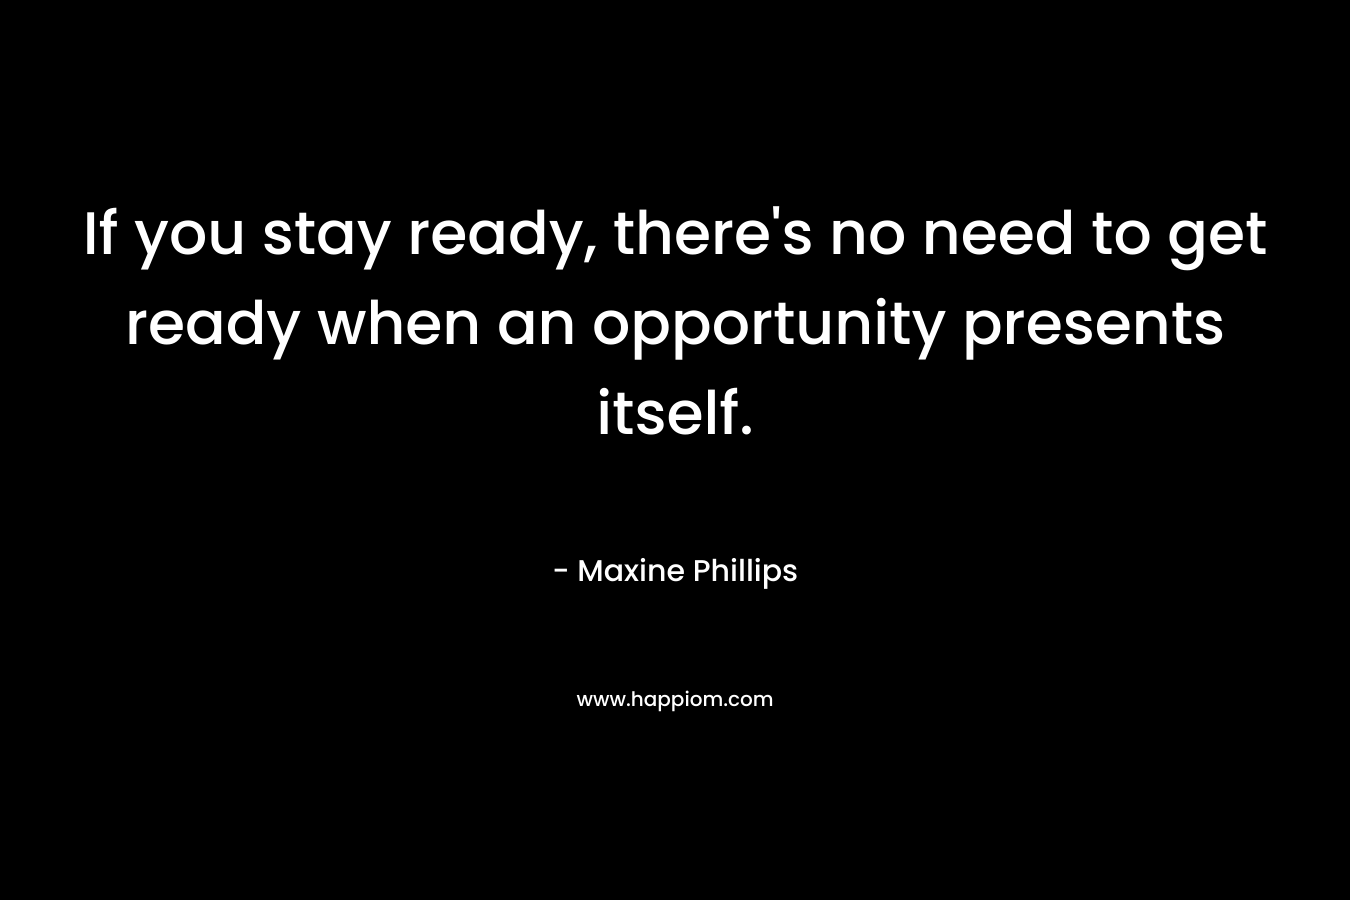 If you stay ready, there's no need to get ready when an opportunity presents itself.